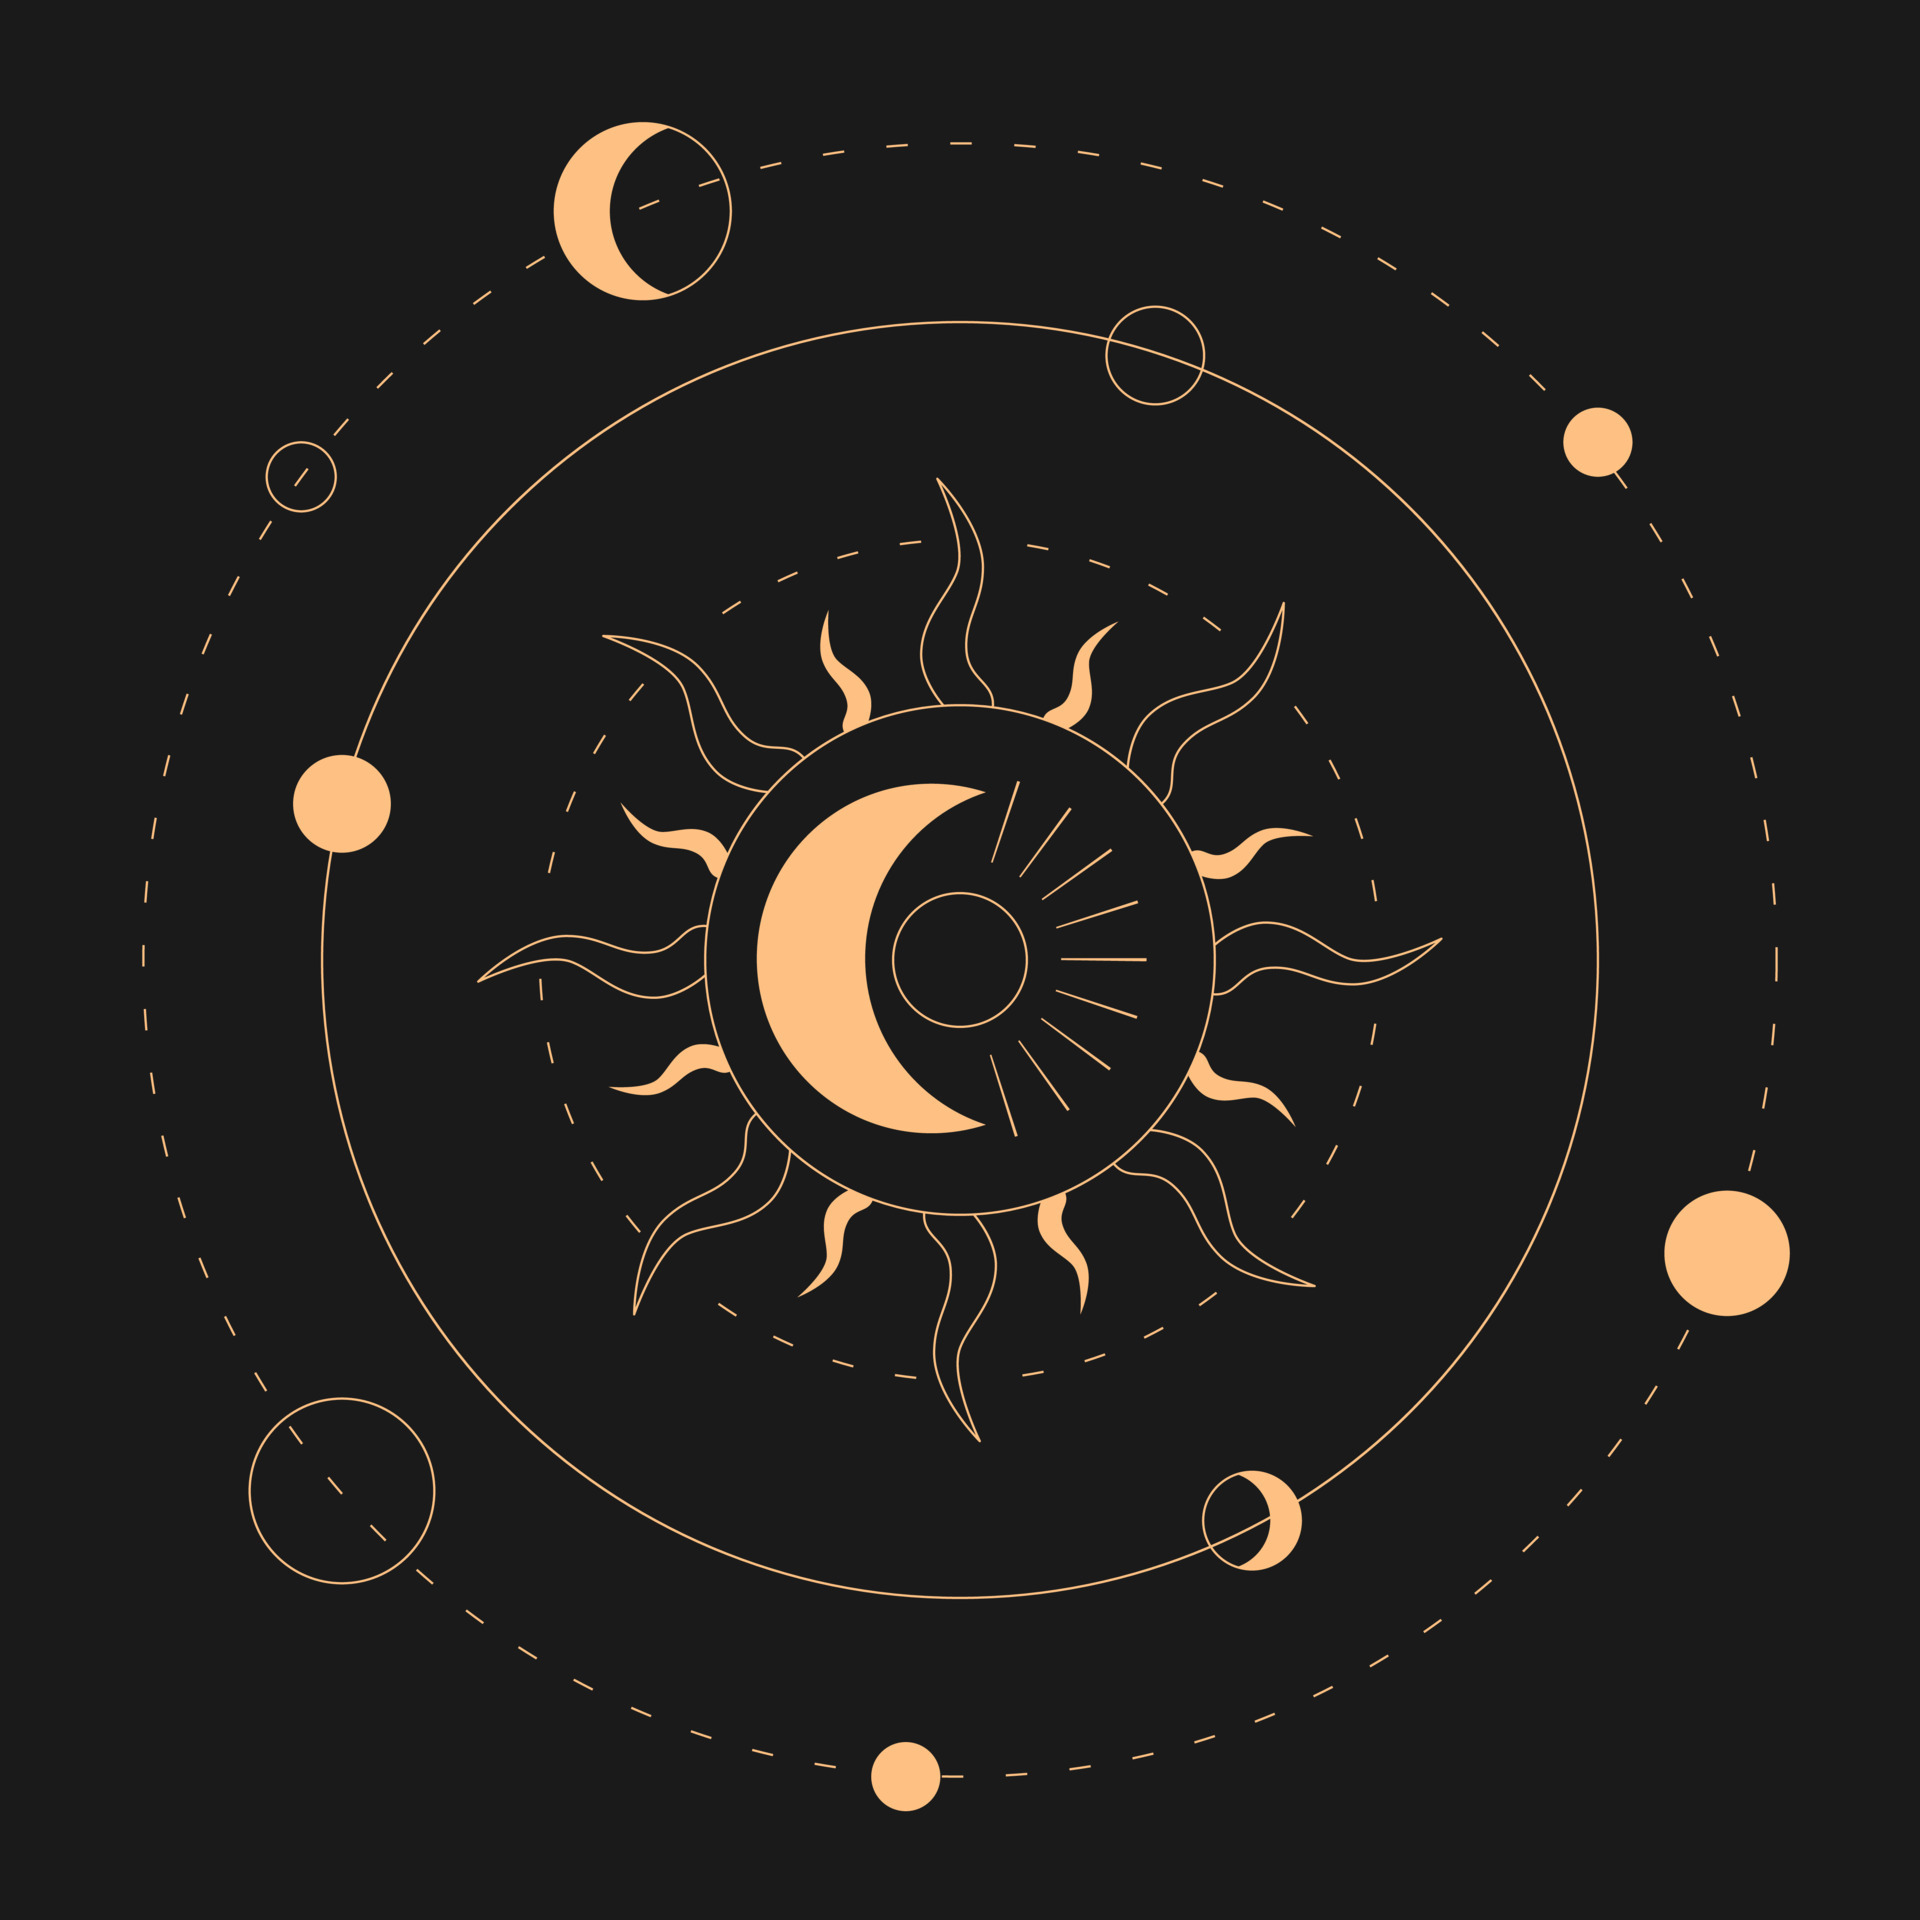 II. Règlement Celestial-sun-and-moon-magical-banner-for-astrology-celestial-alchemy-device-of-the-universe-crescent-sun-with-the-moon-and-planets-on-a-black-background-esoteric-illustration-vector